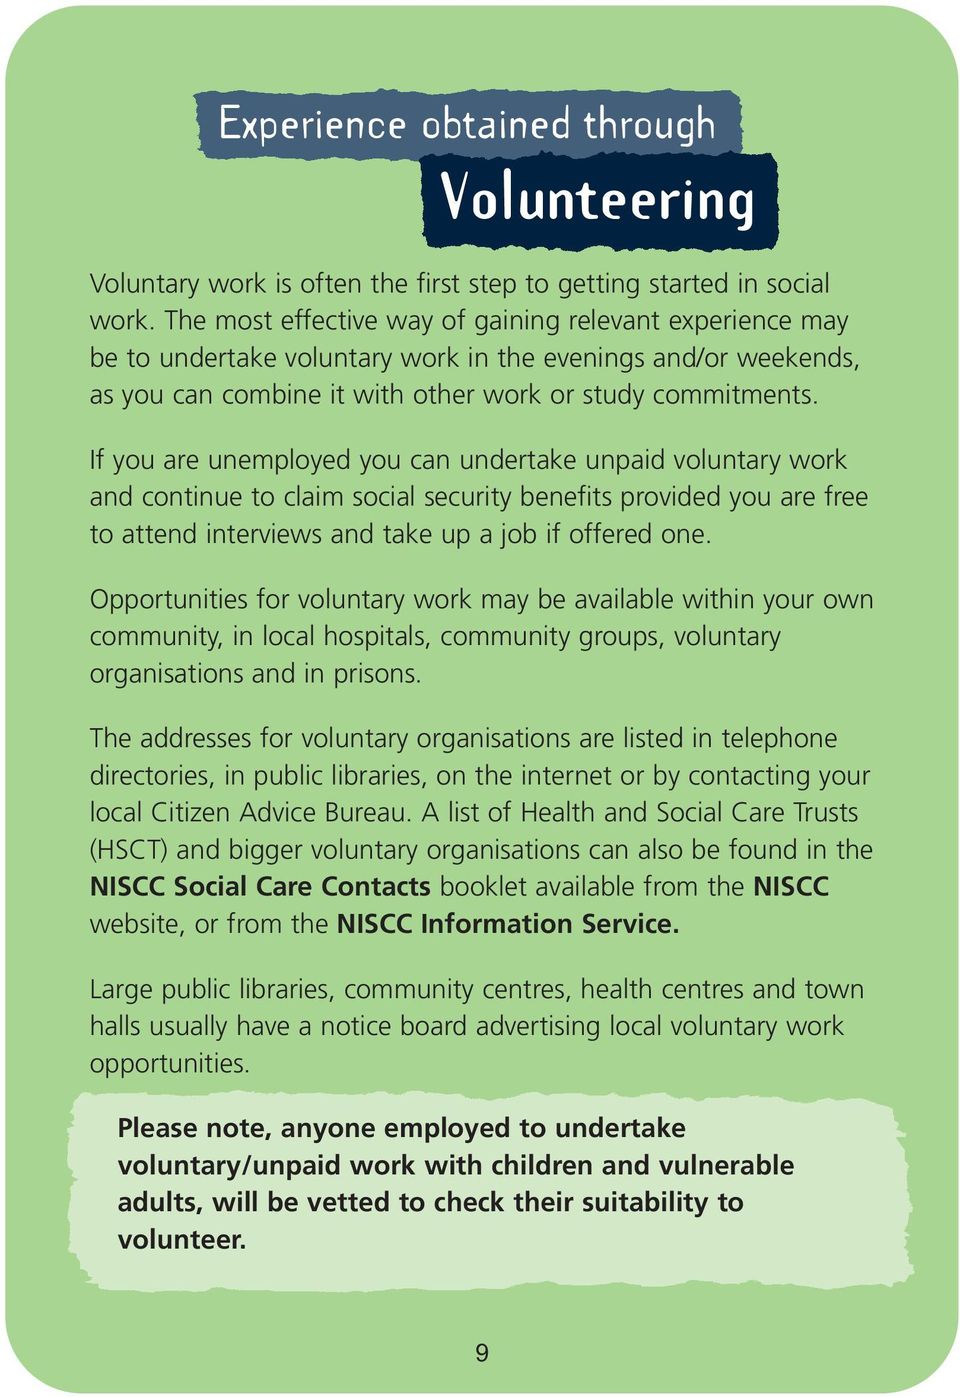 If you are unemployed you can undertake unpaid voluntary work and continue to claim social security benefits provided you are free to attend interviews and take up a job if offered one.